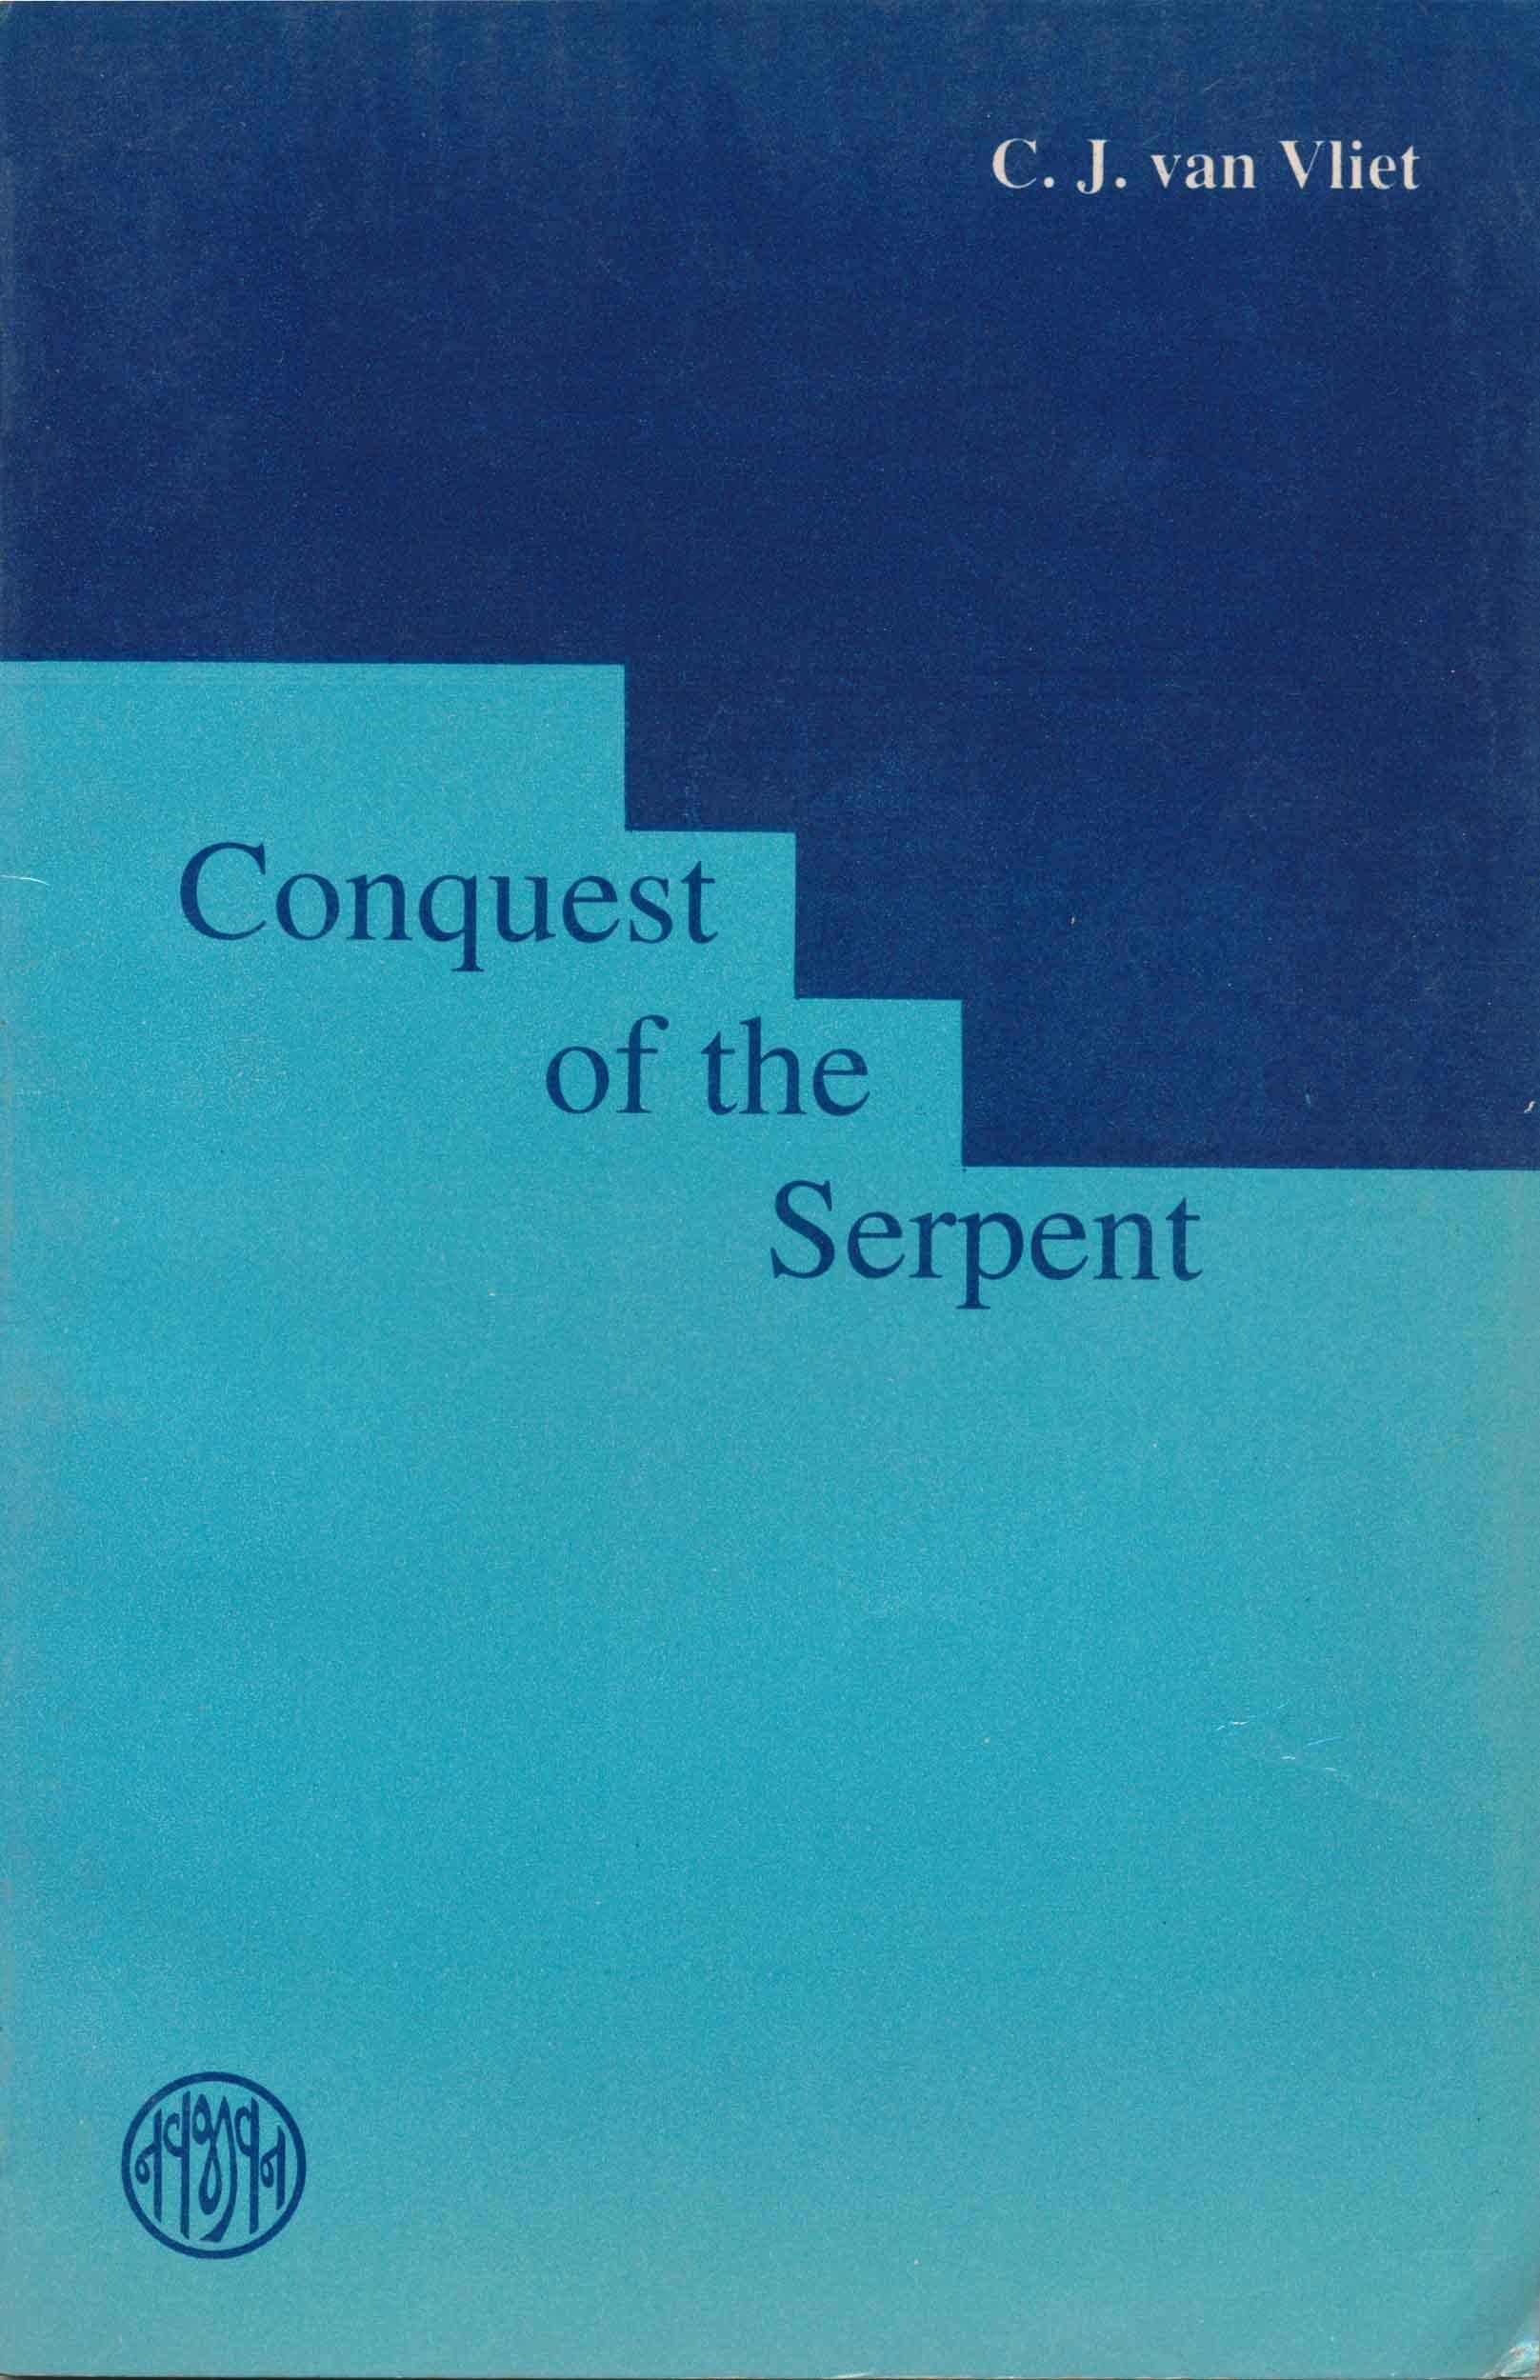 Conquest of the Serpent